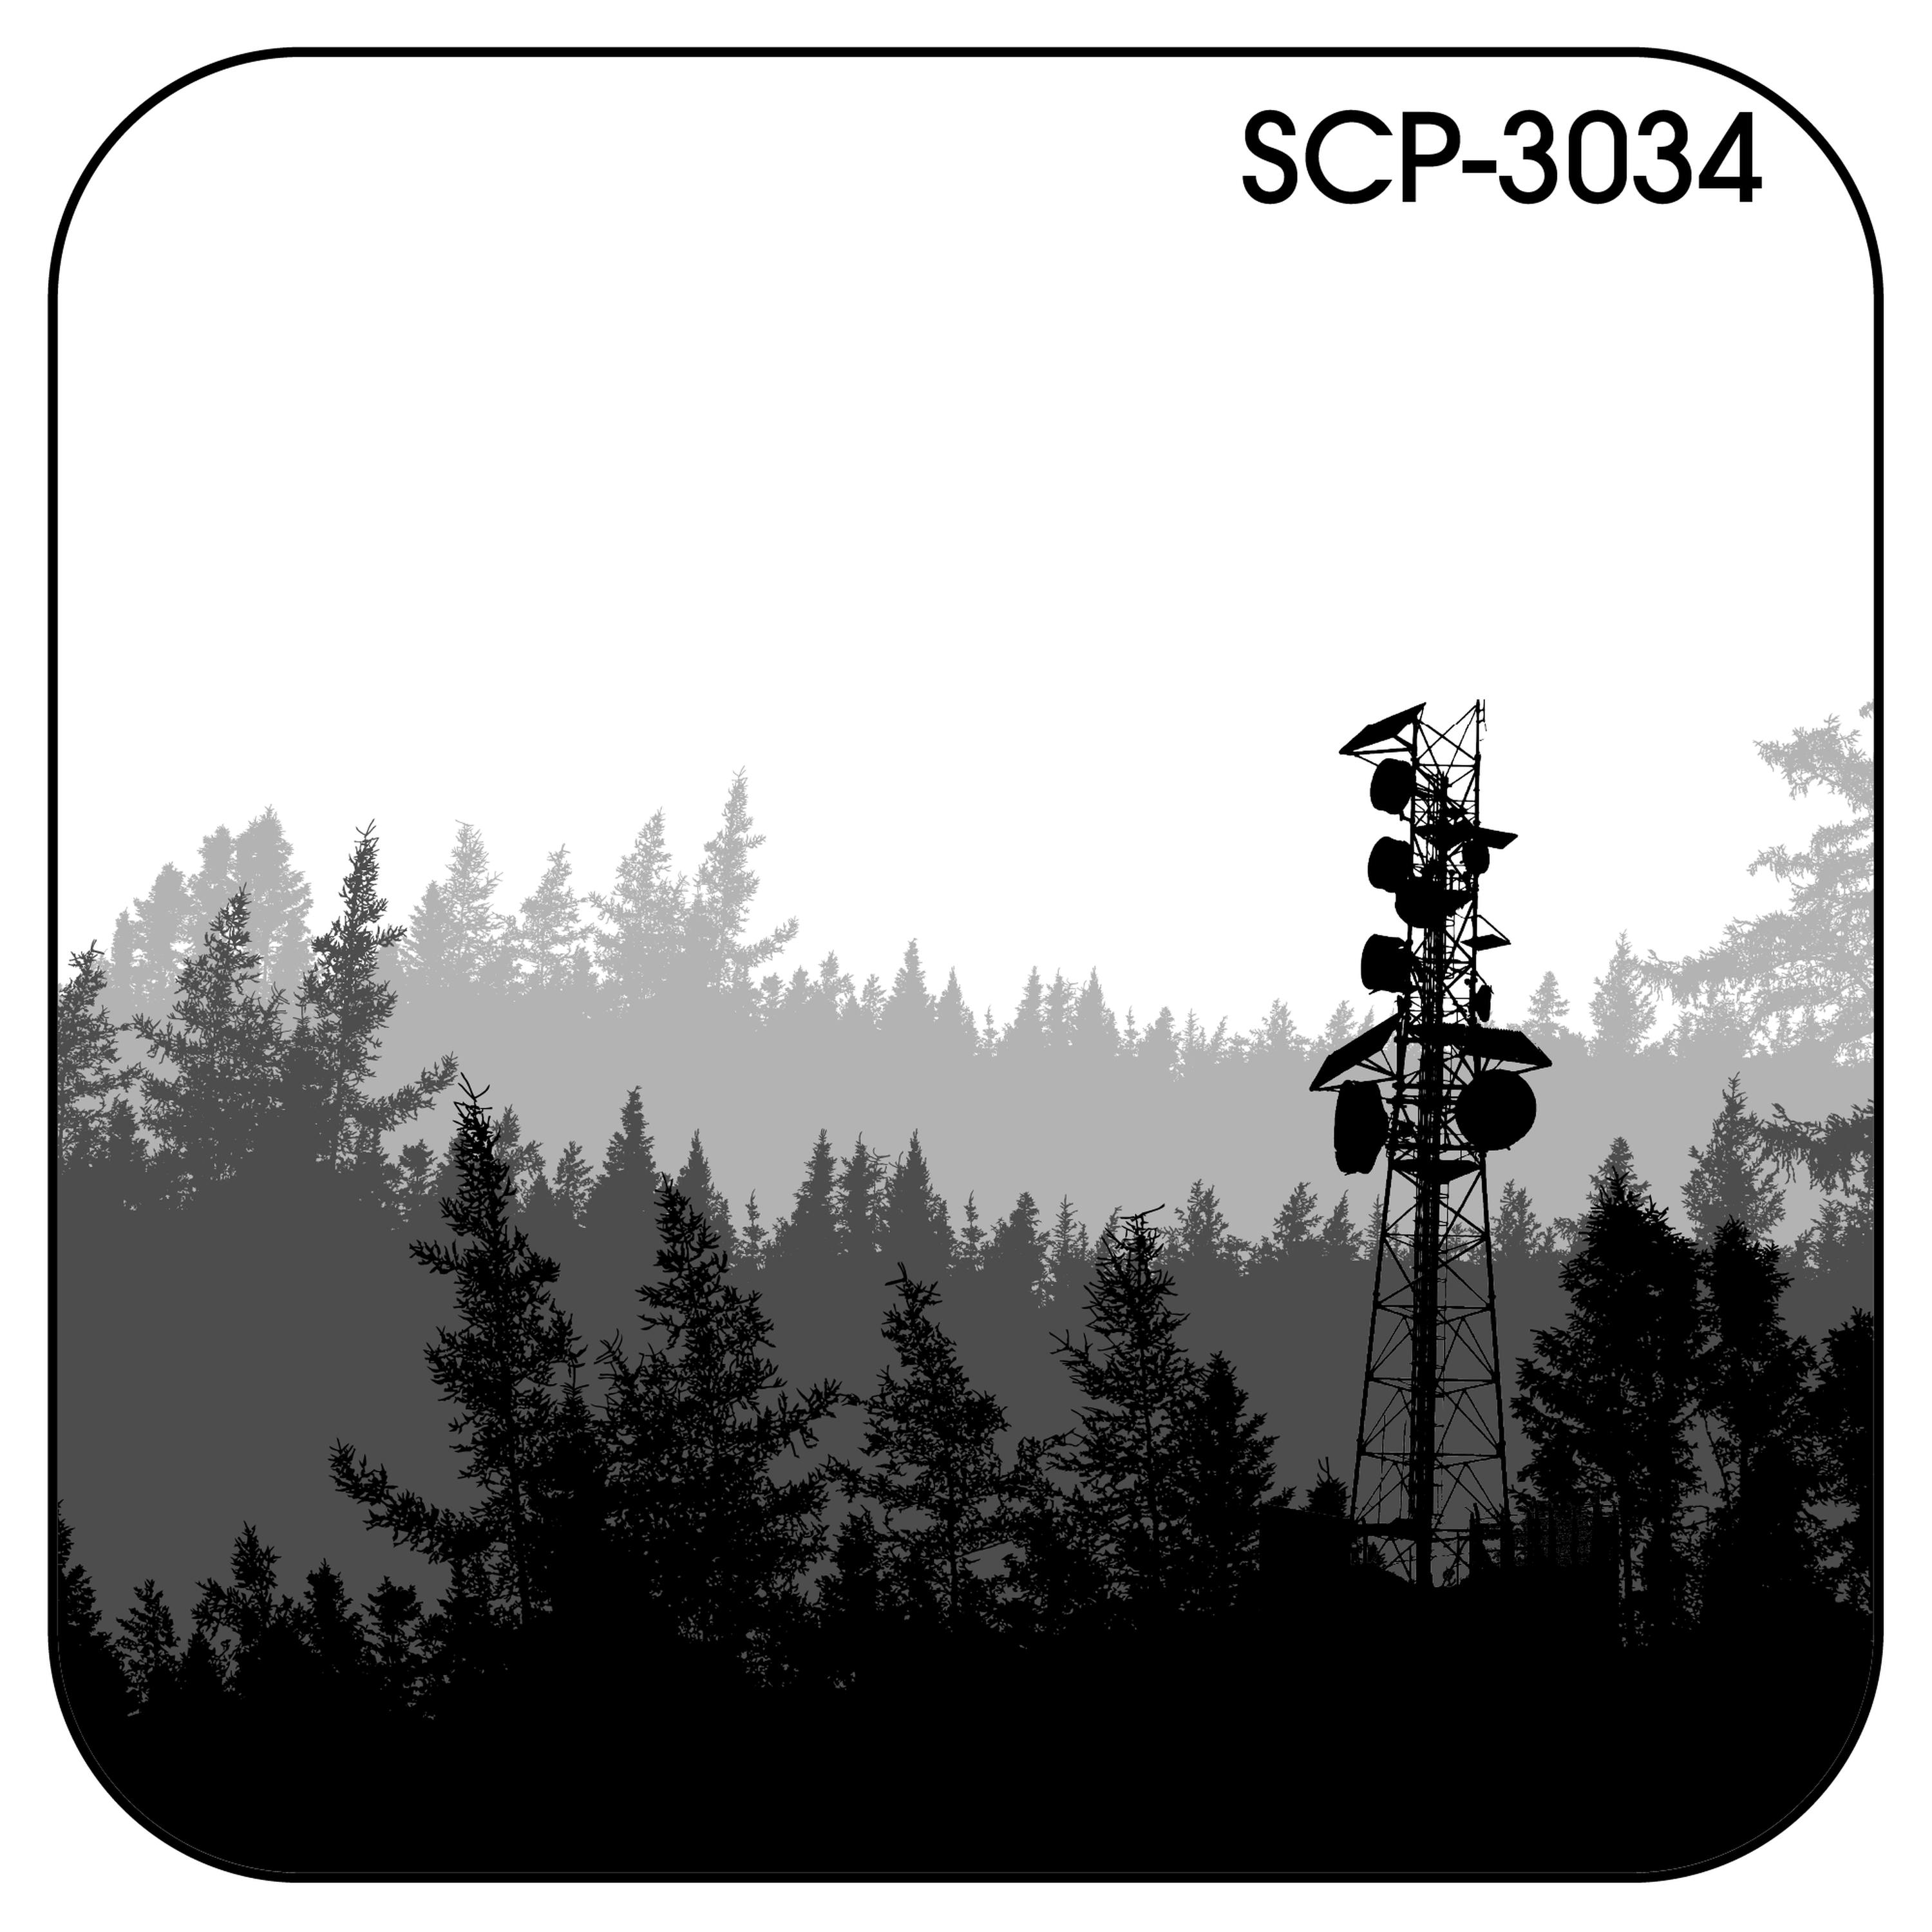 SCP-3034: ”The Counting Station”